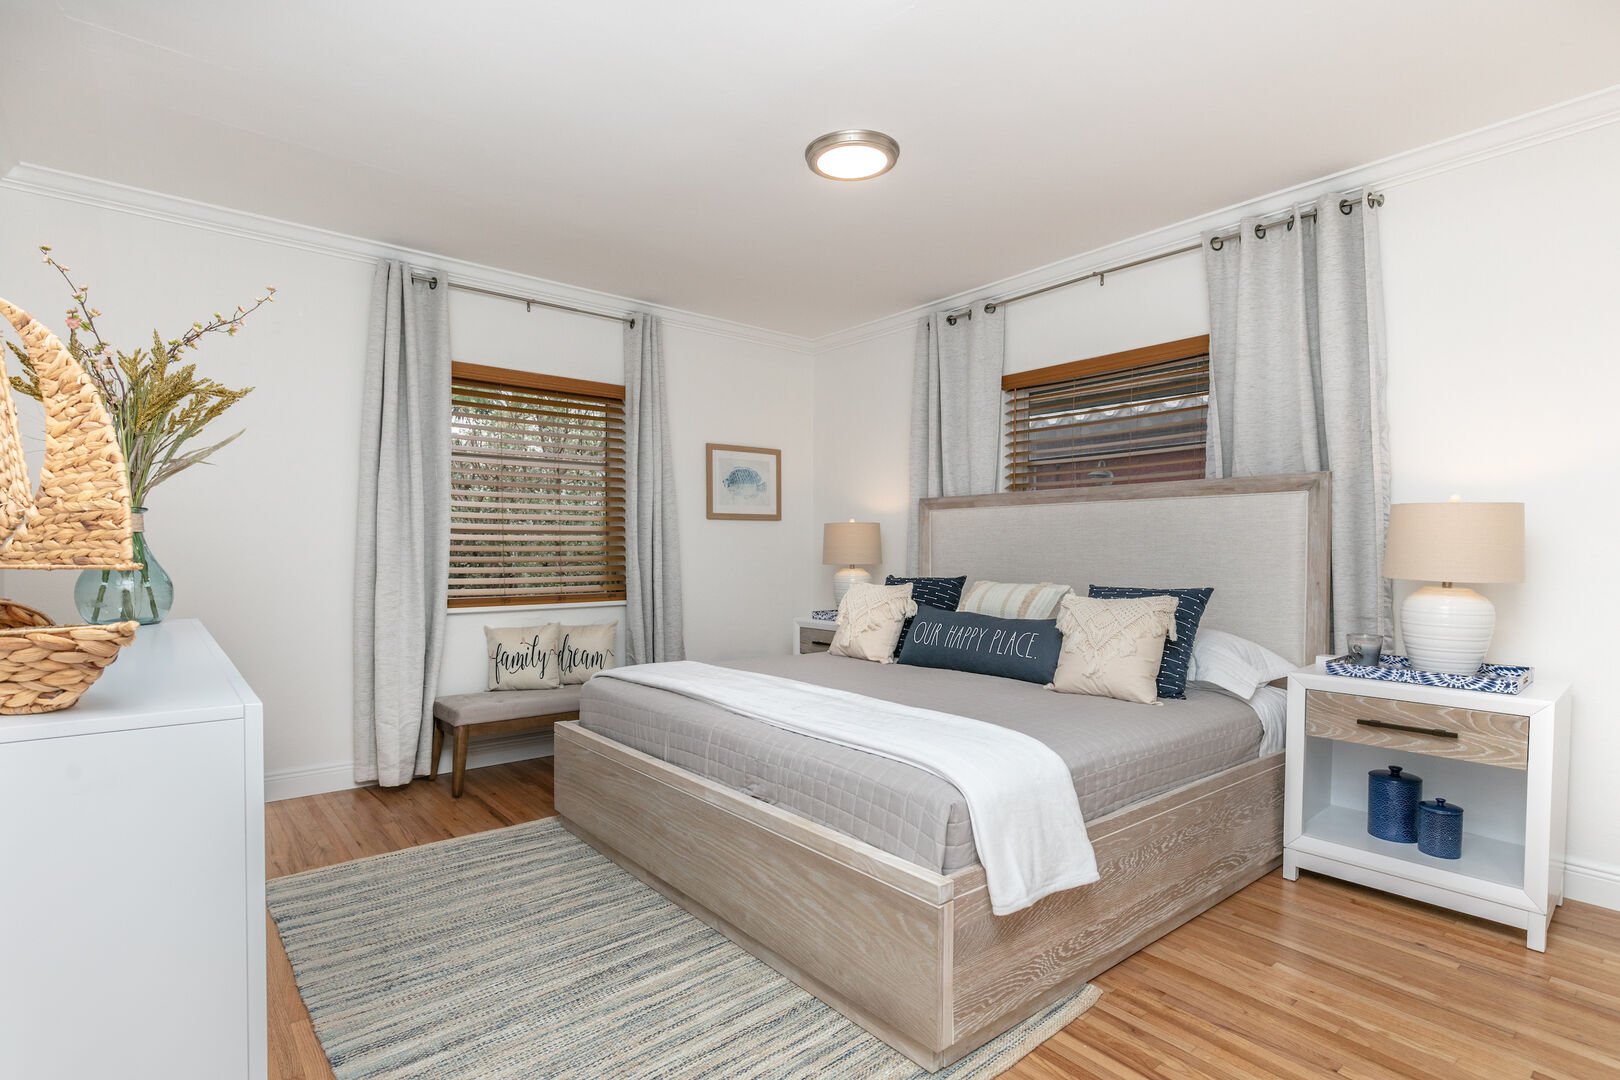 The master bedroom features a comfortable king-sized bed, a dresser, and a Smart TV